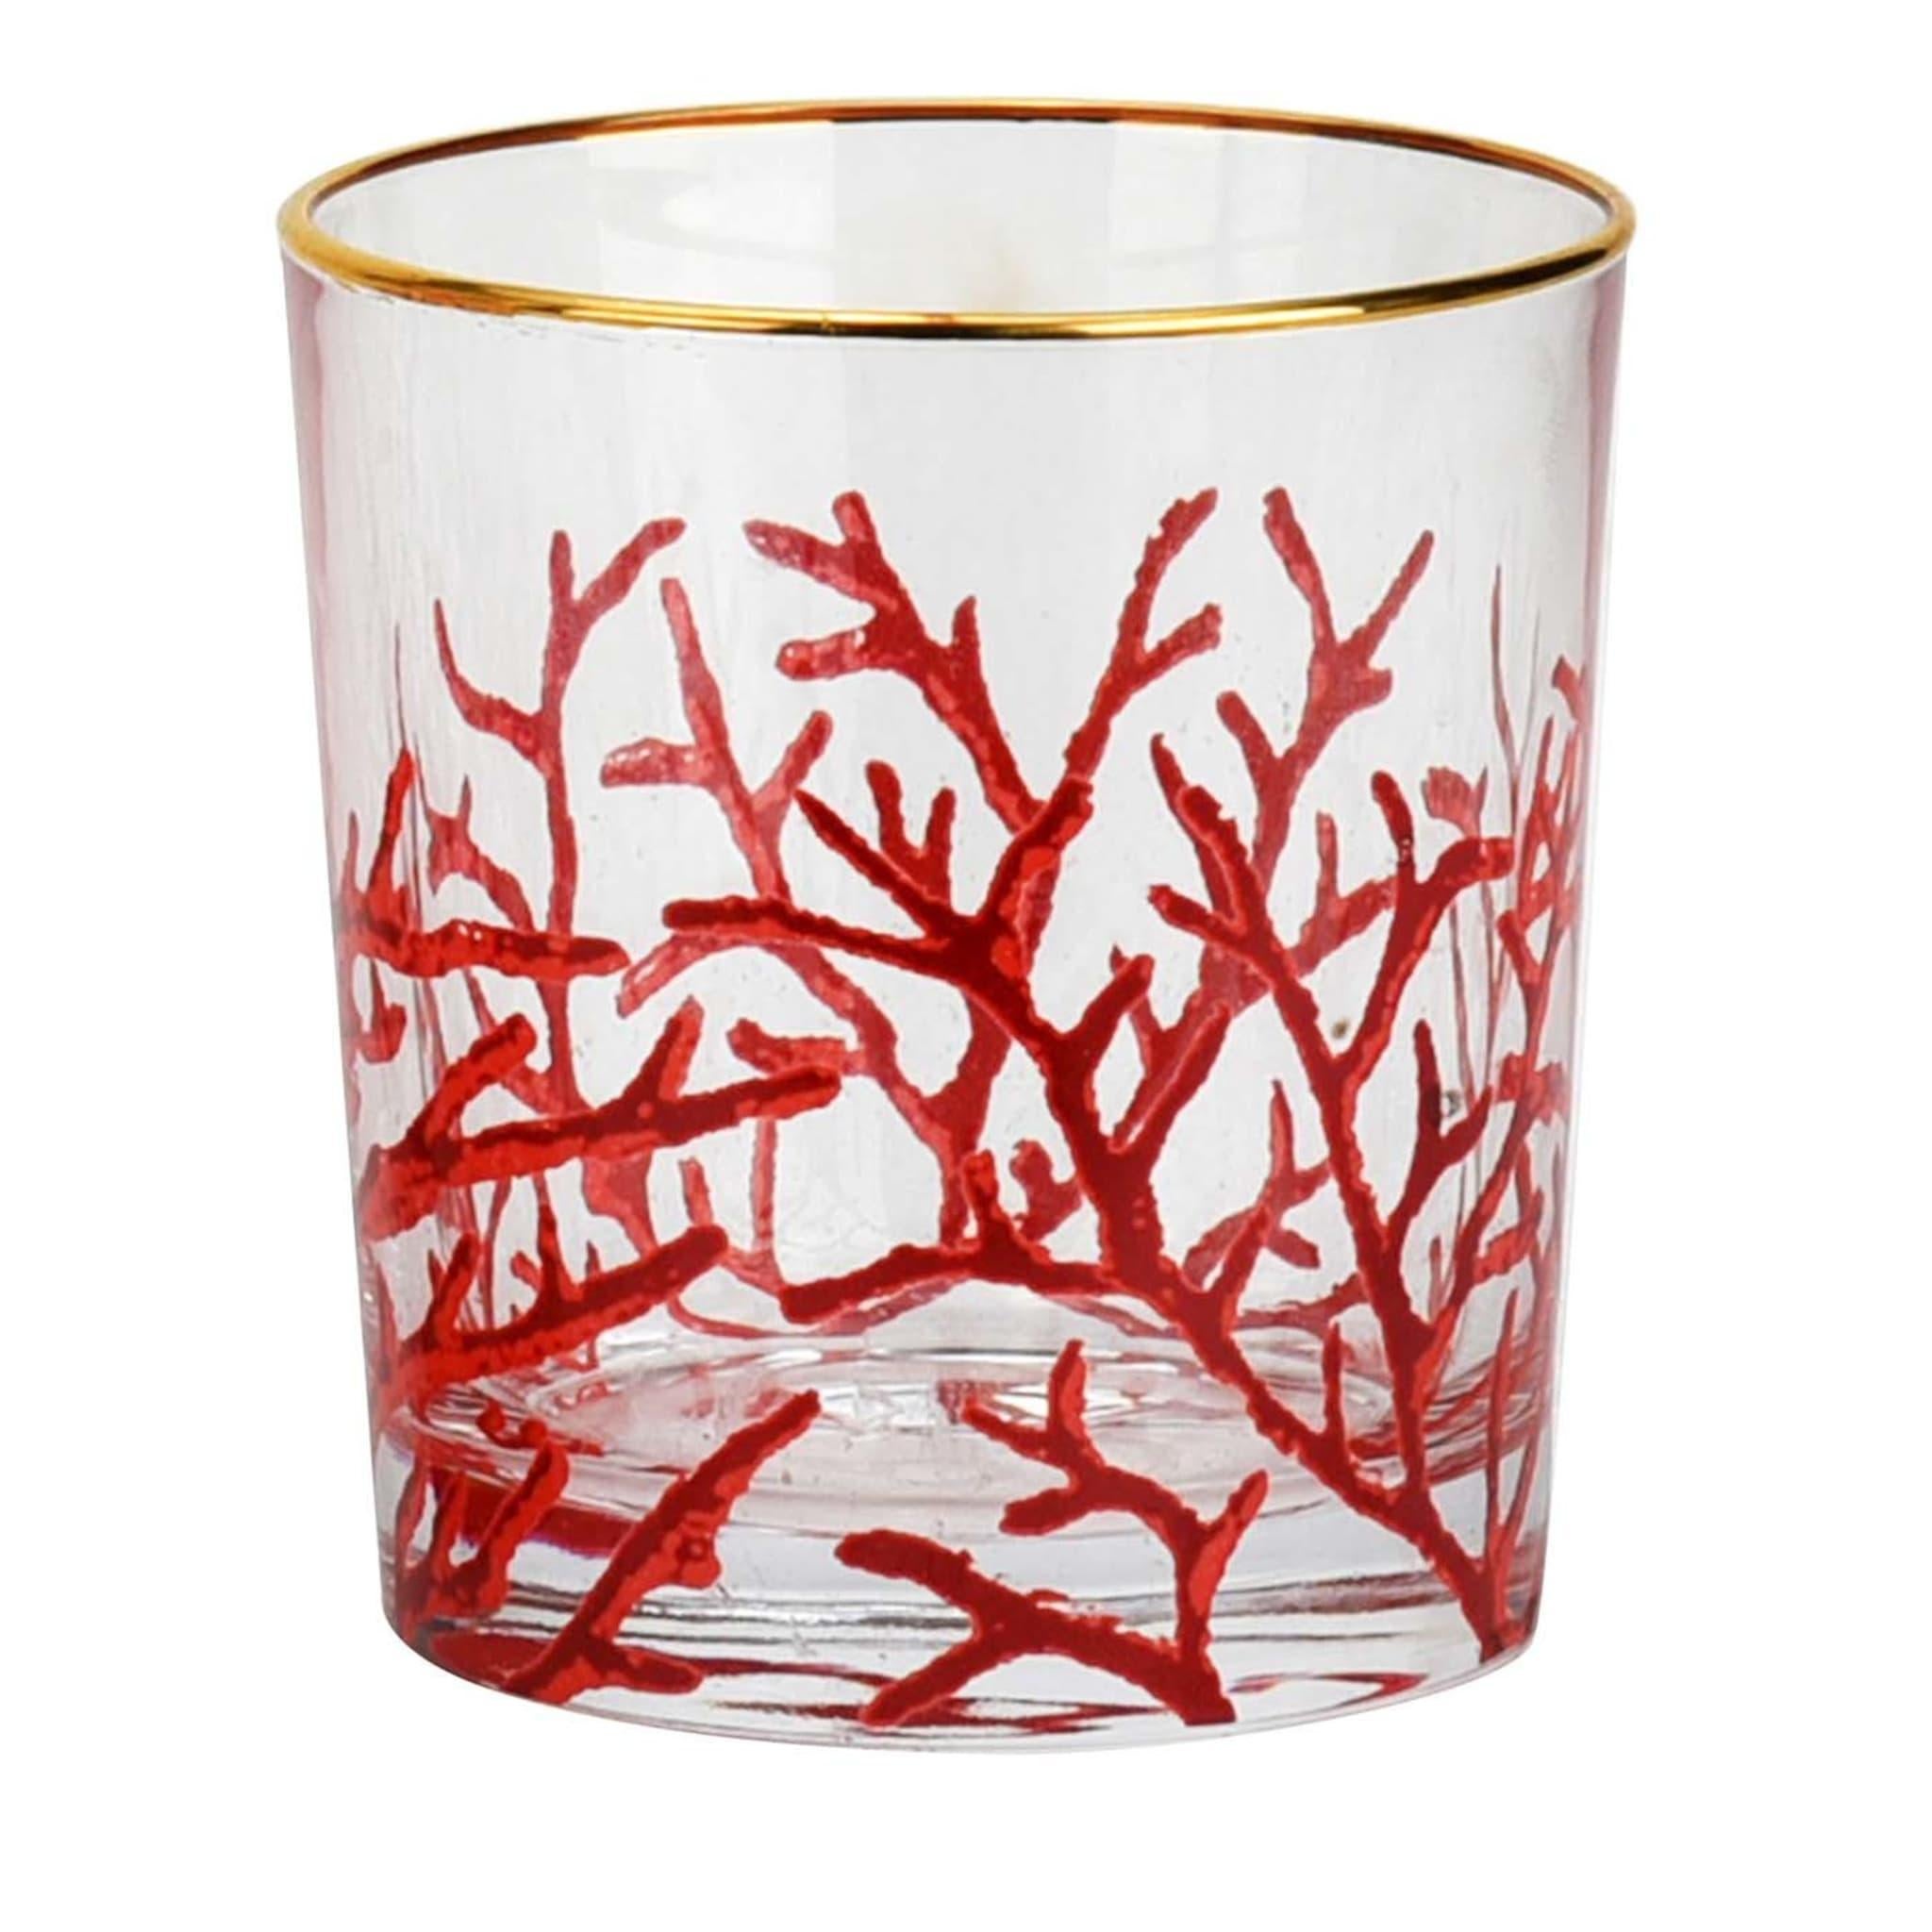 A singular piece of functional decor to be paired with others from the same series, this superb water glass will infuse any tableware with refined sophistication. Handcrafted of crystal, it is masterfully decorated by hand with a magnificent coral